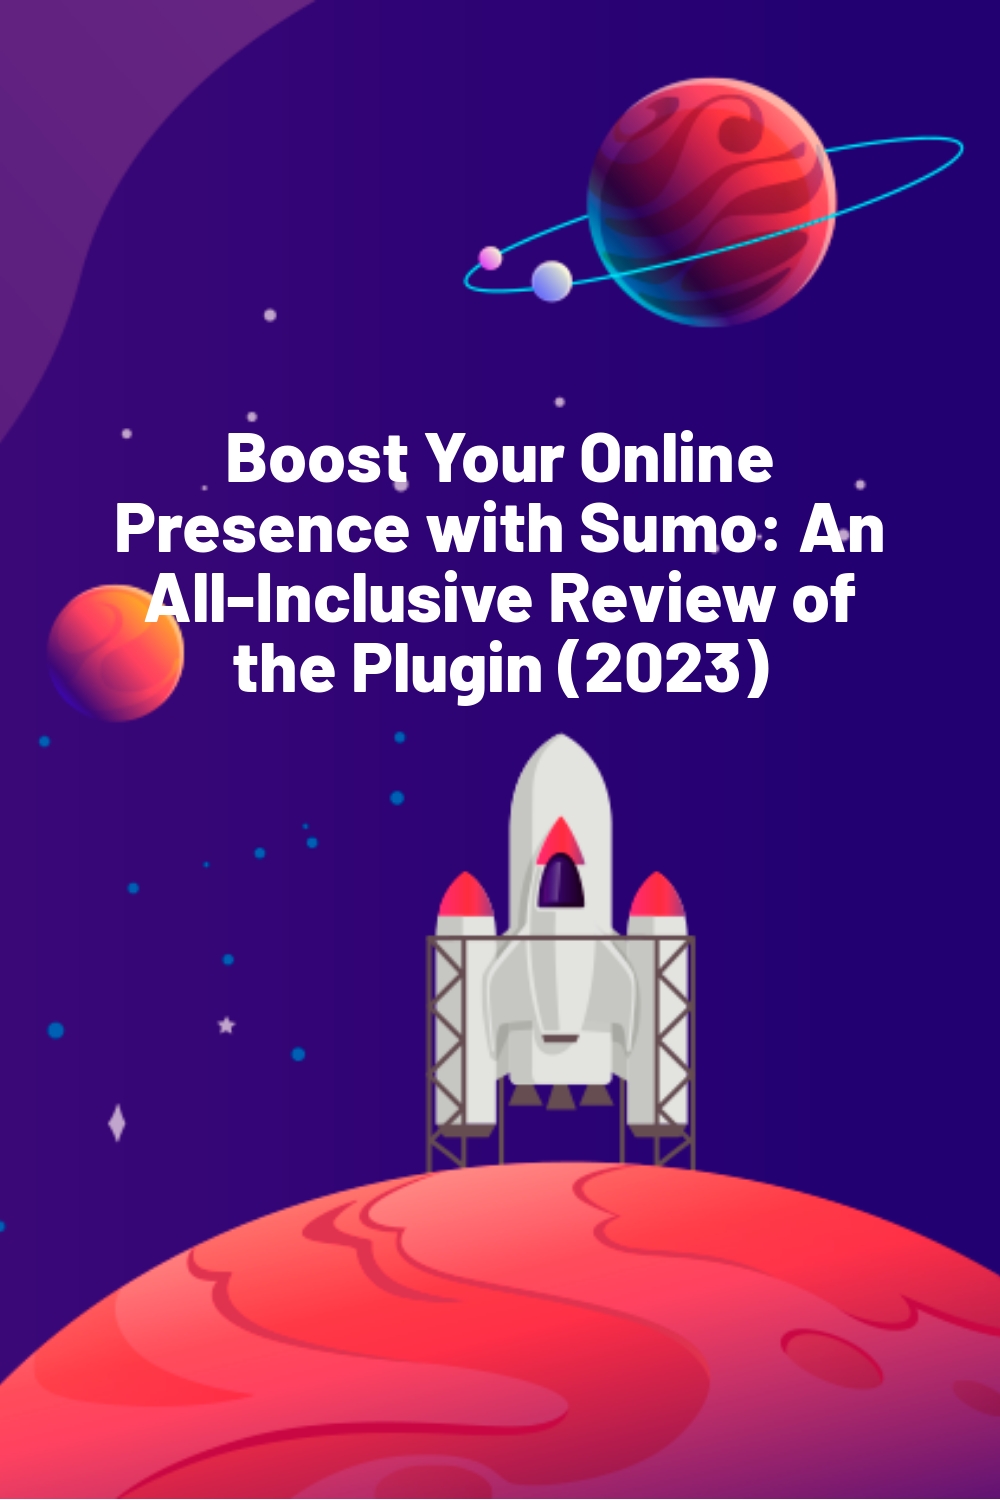 Boost Your Online Presence with Sumo: An All-Inclusive Review of the Plugin (2023)